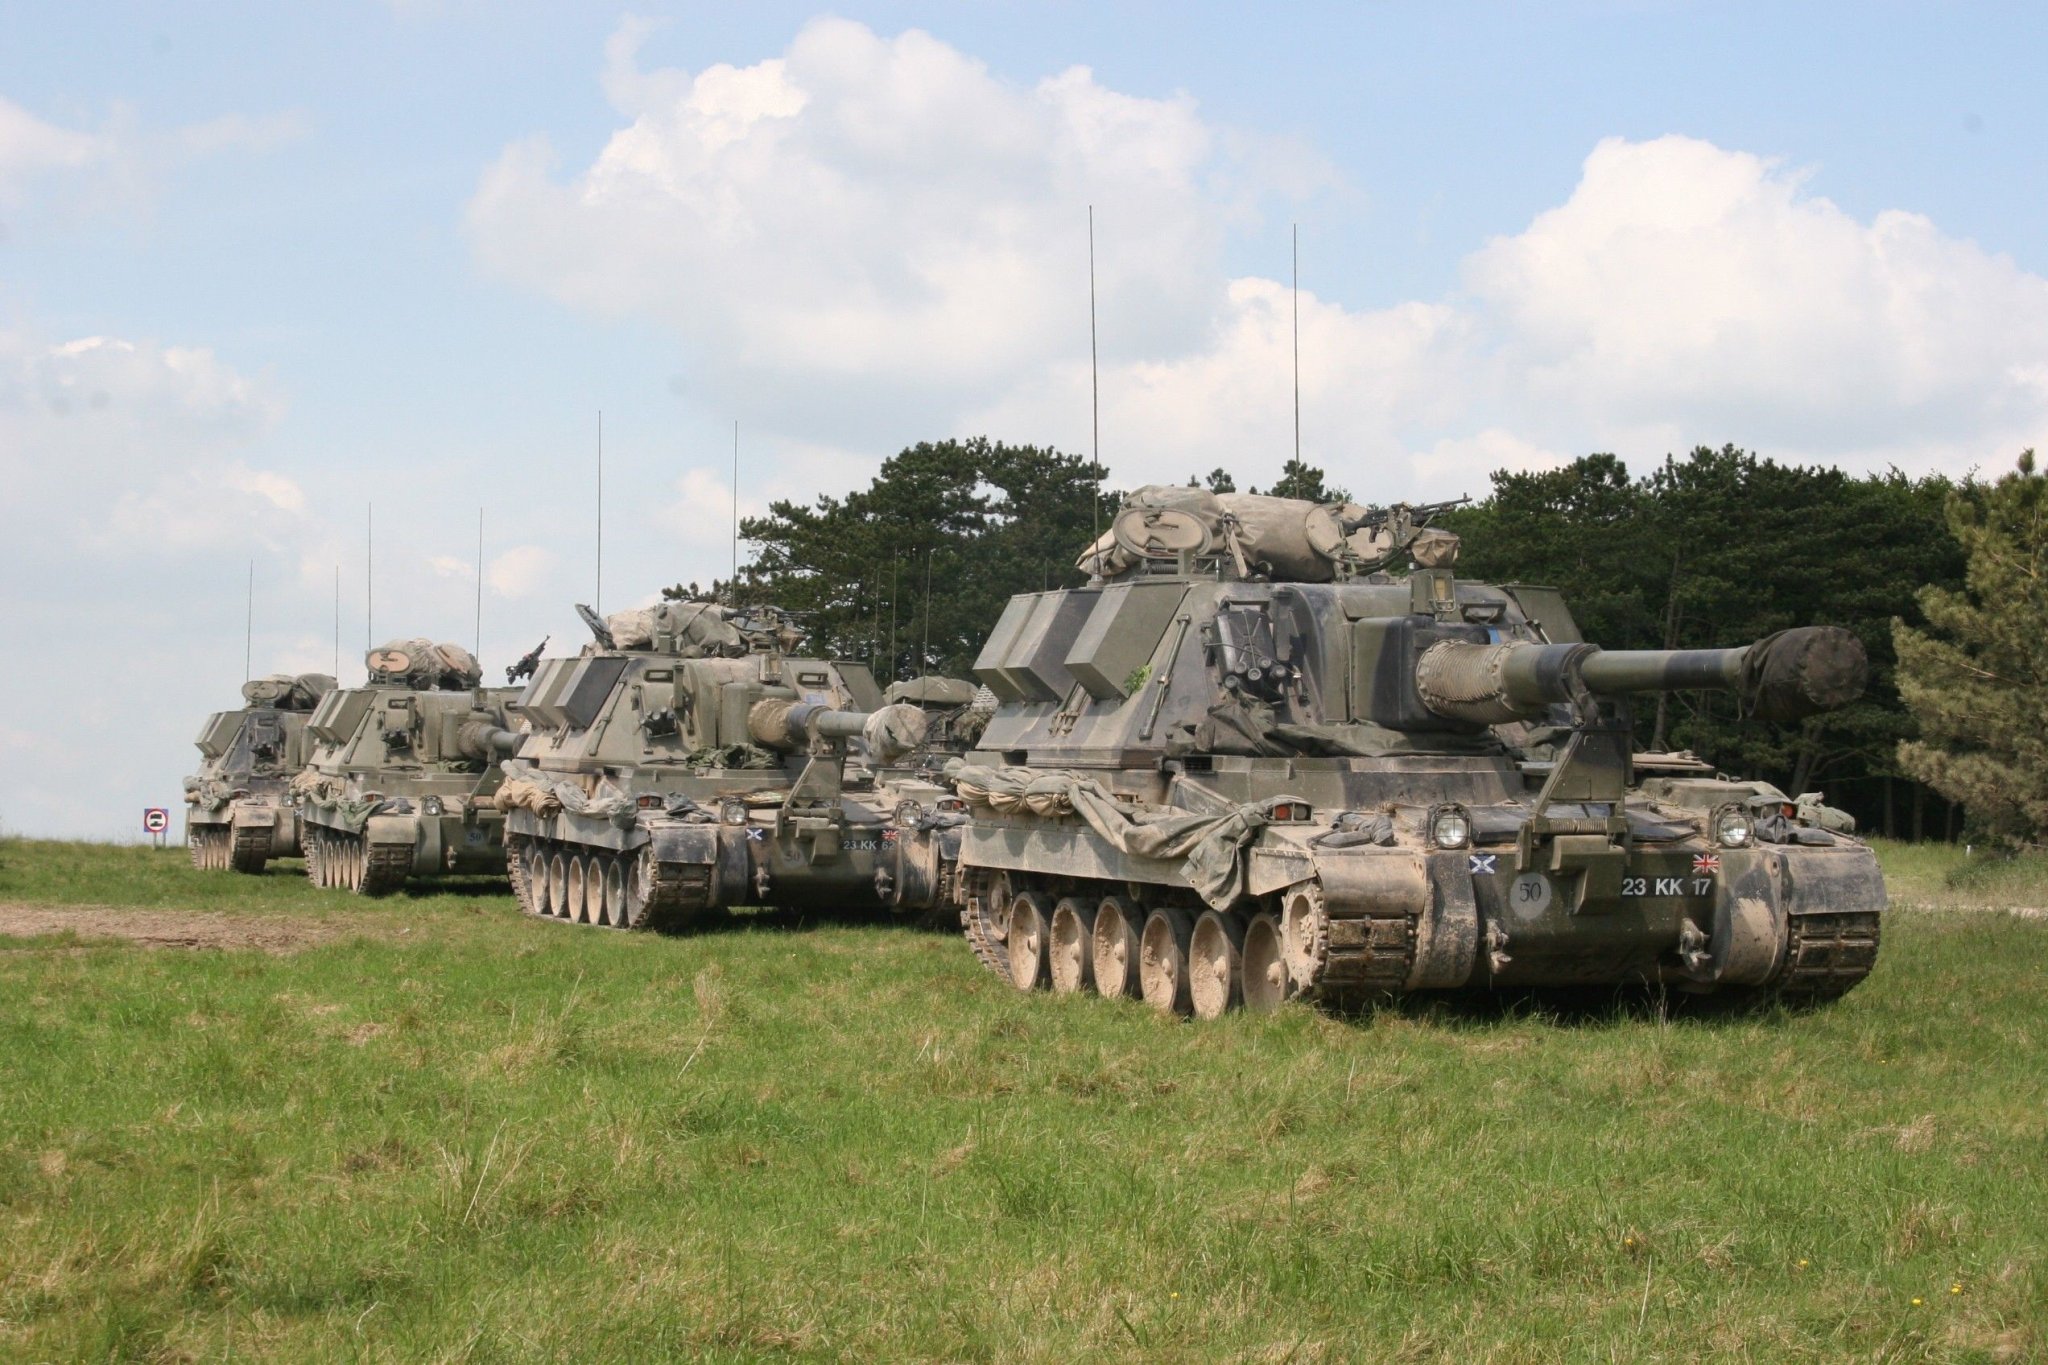 Howitzers And Other Self-Propelled Artillery Anyone Would Mistake For Main Battle Tanks